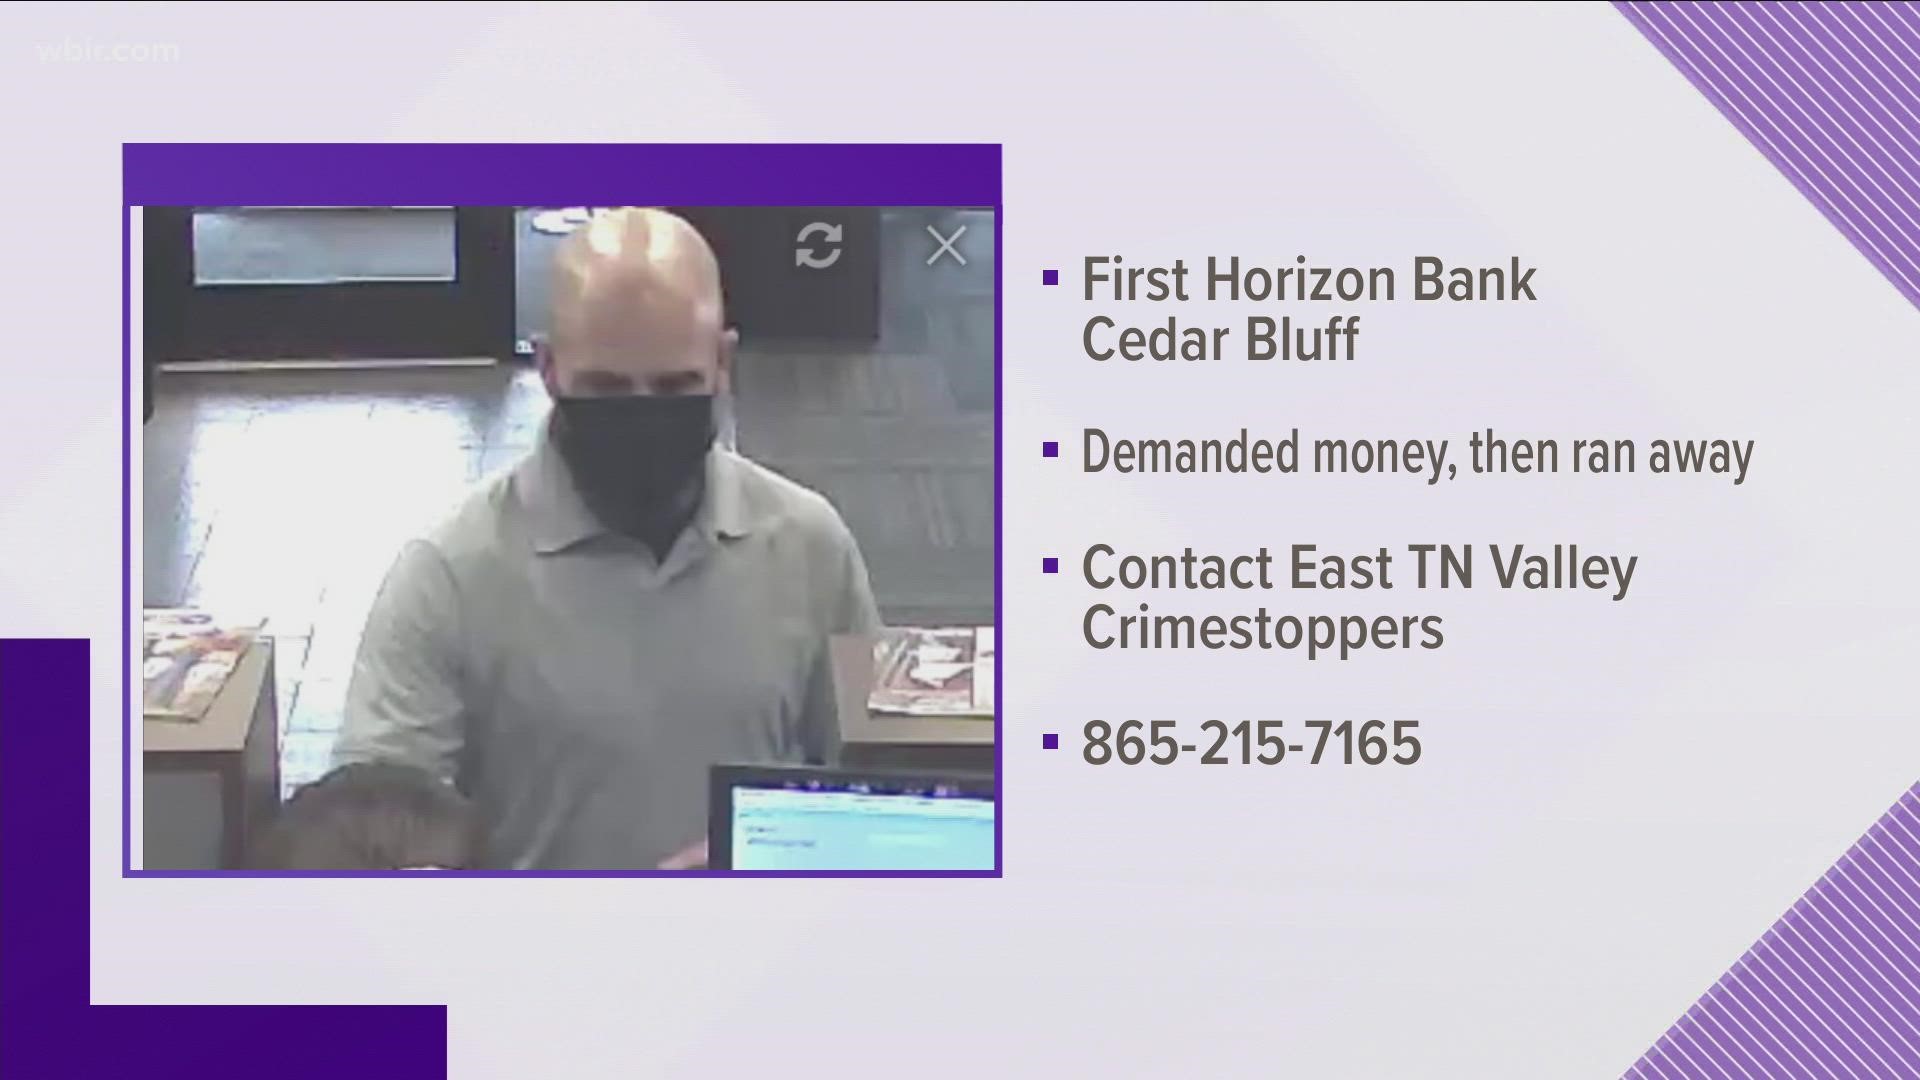 The robber struck First Horizon Bank about 3:10 p.m. Monday.